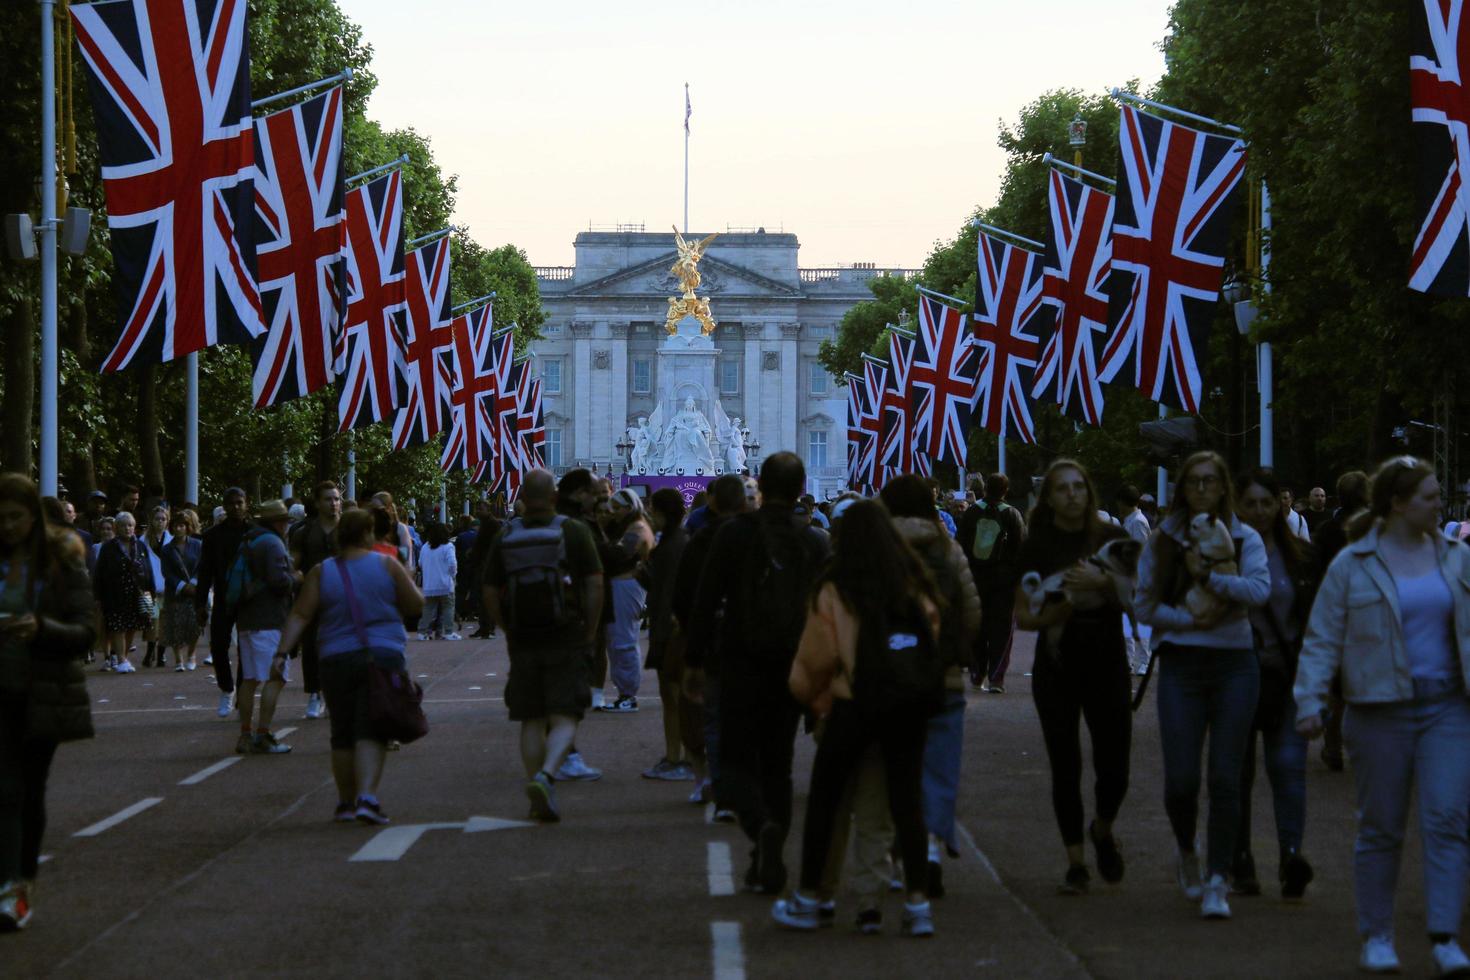 London in the Uk in June 2022. People celebrating the Queens Platinum Jubilee photo